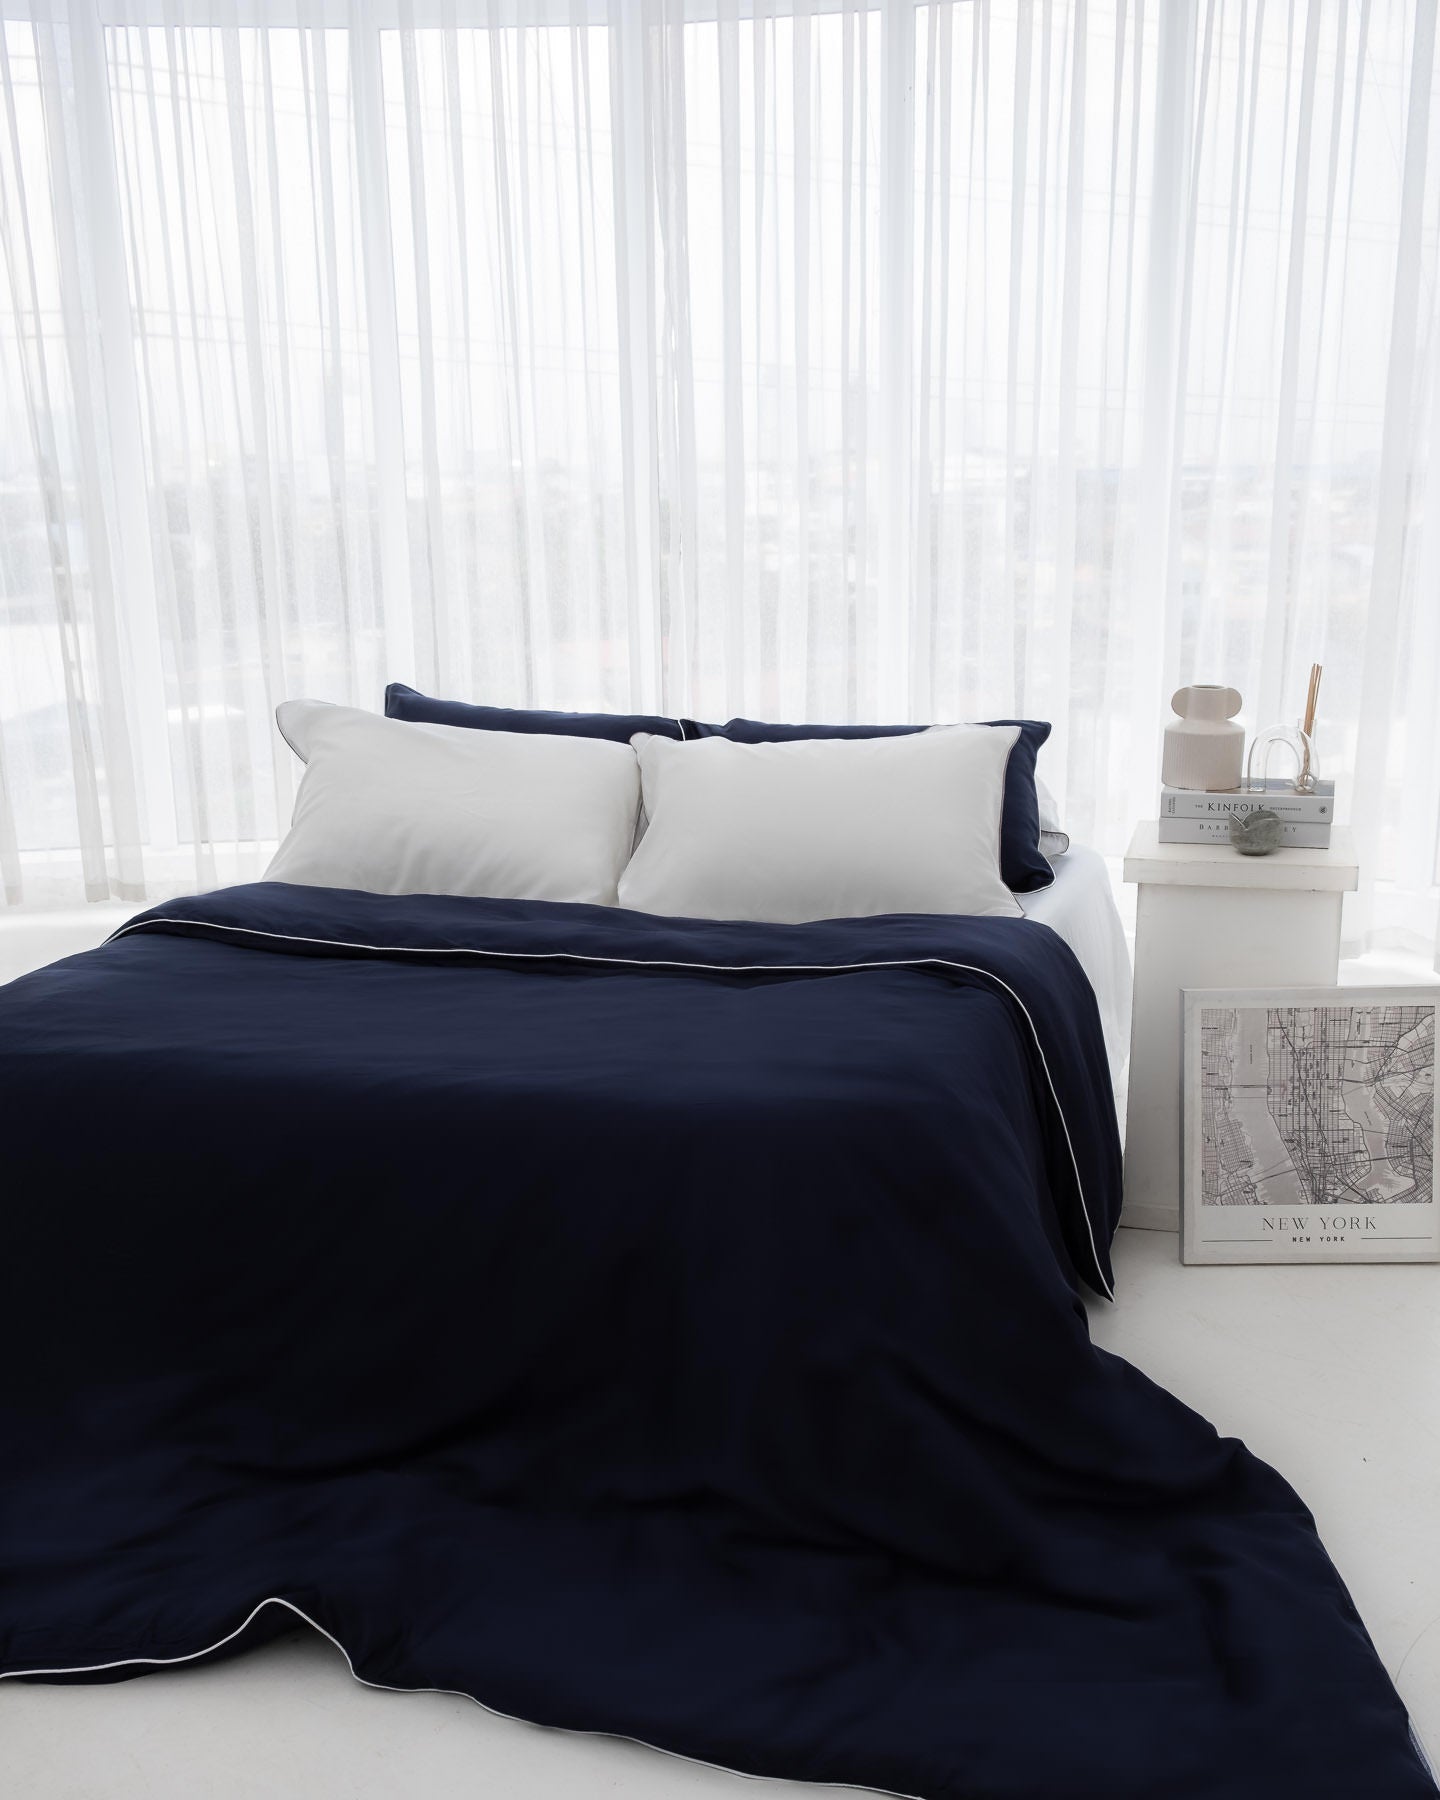 ava and ava philippines bamboo sheet set with navy organic bamboo lyocell duvet cover and white pillowcases